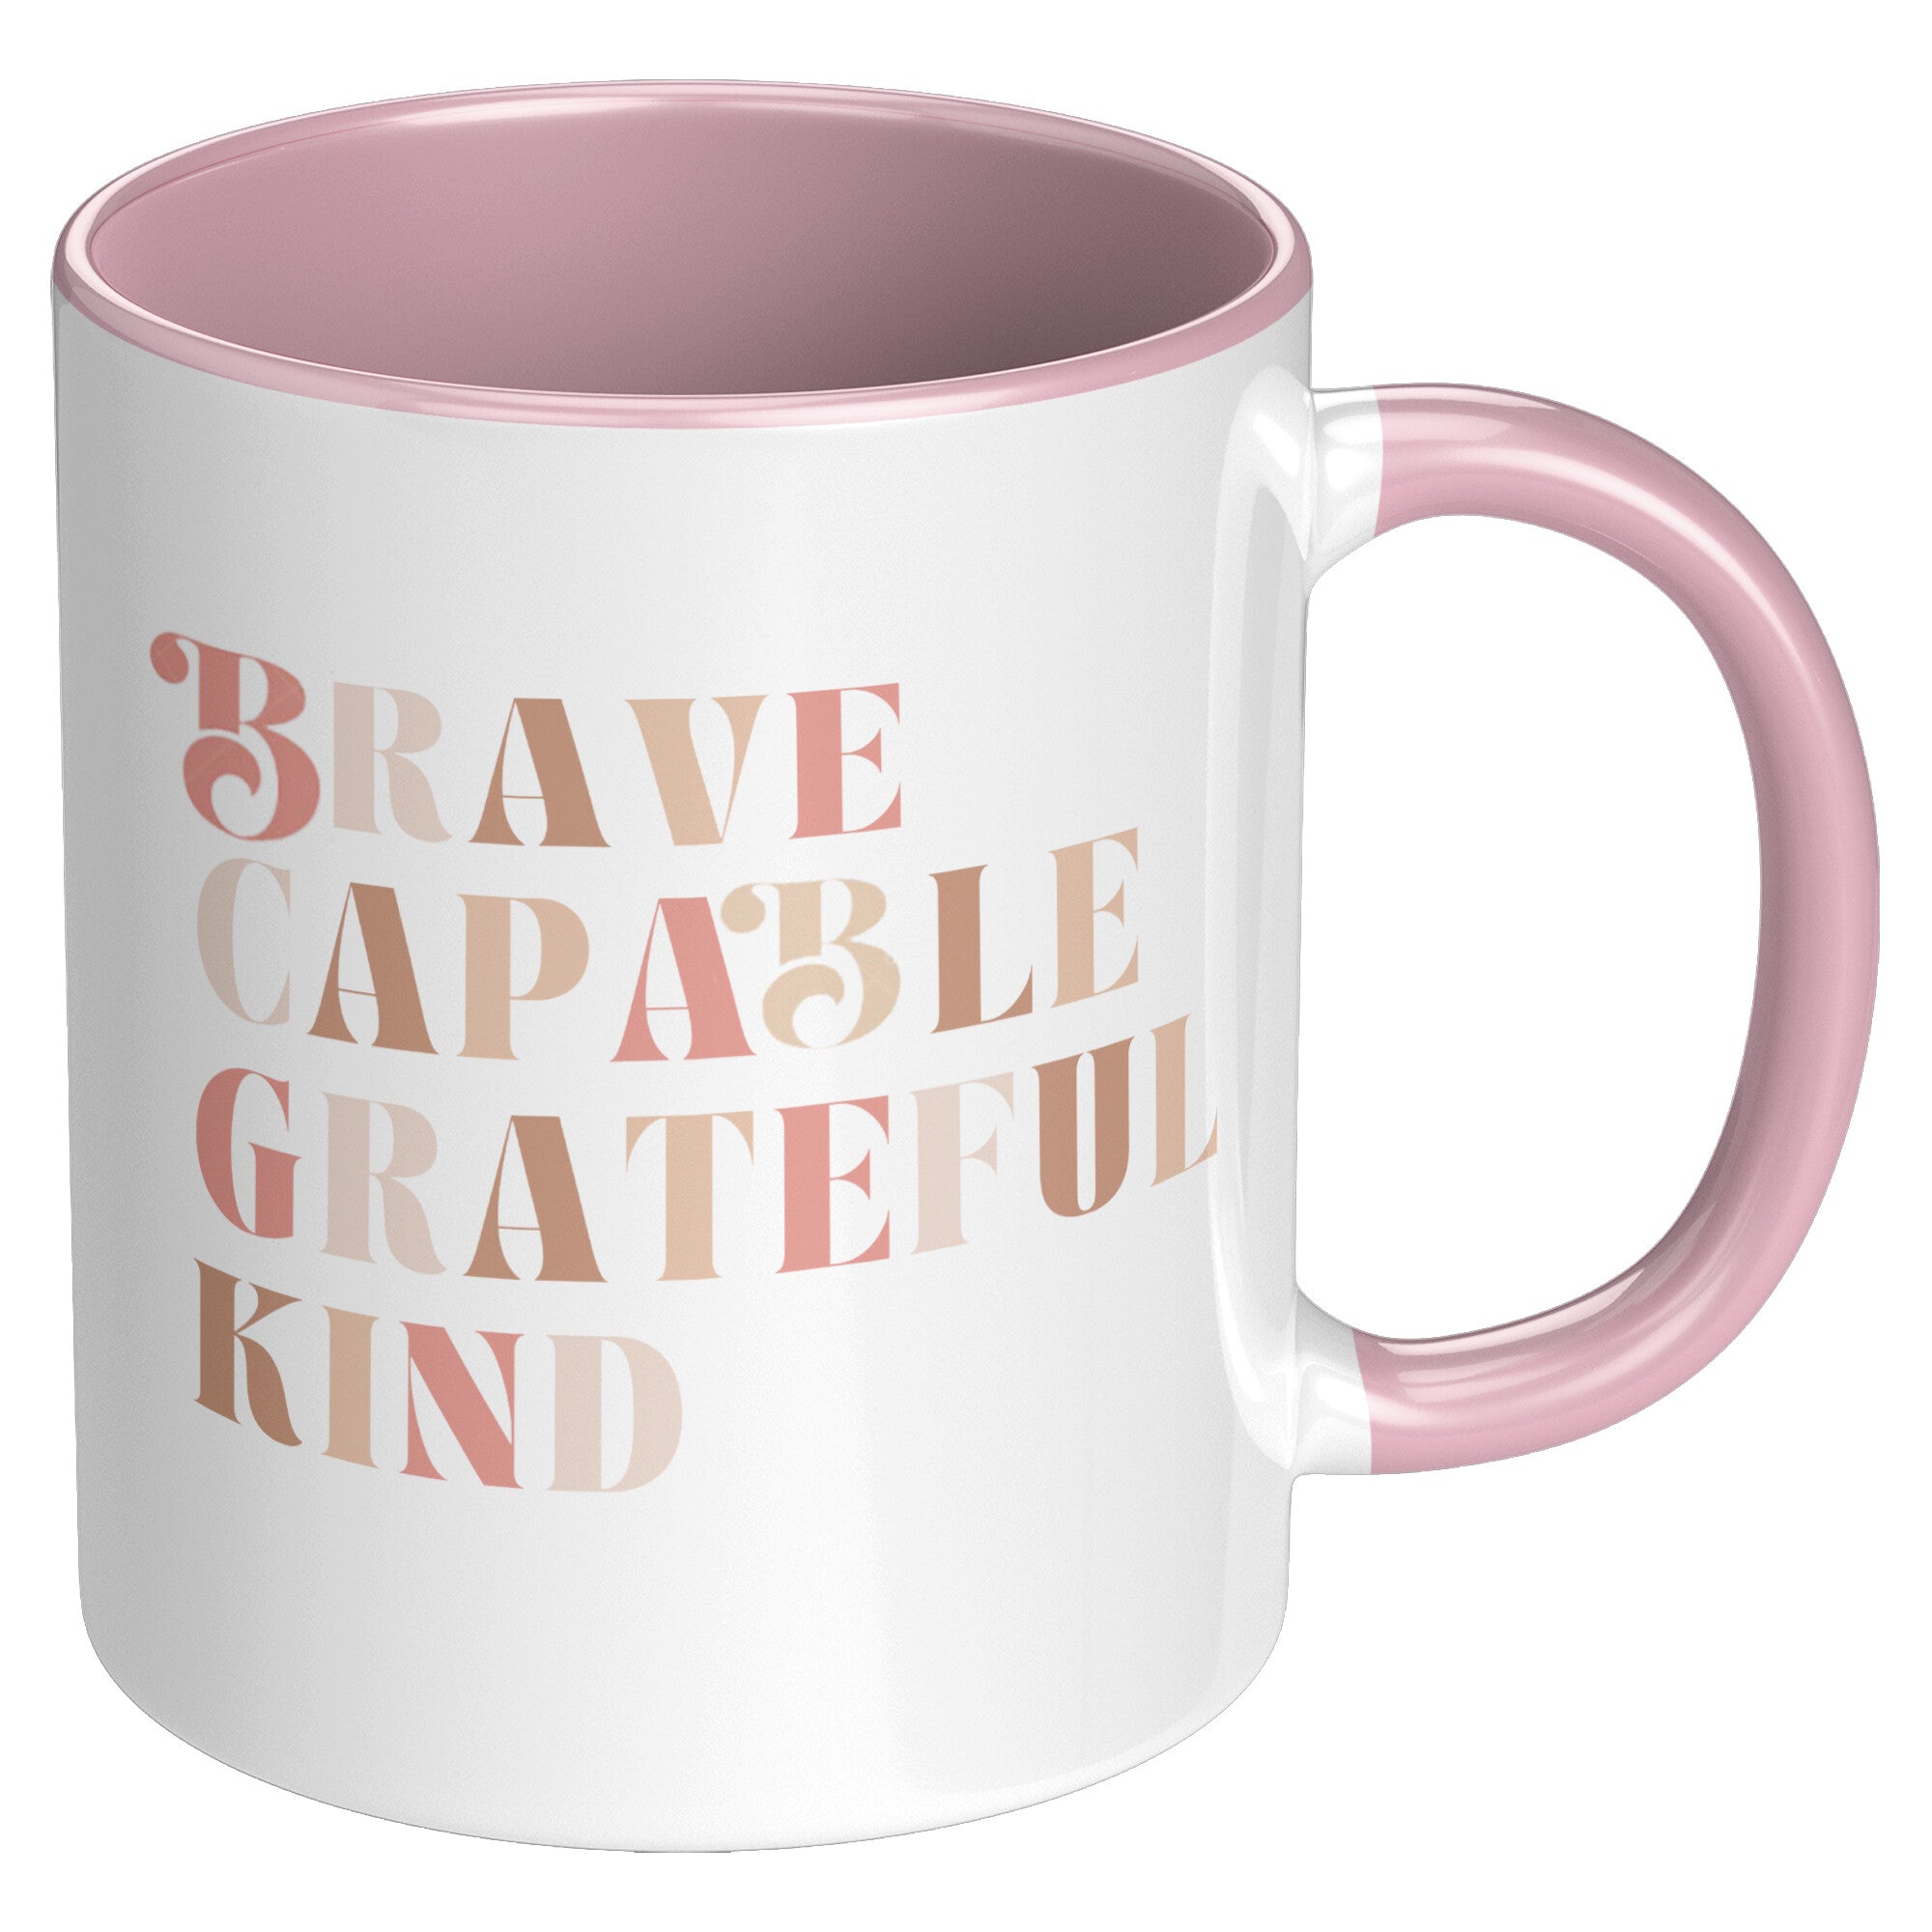 Beautiful, Capable, Grateful, Kind 11oz. Accent Coffee Mug - The Kindness Cause gifts that donate to charity